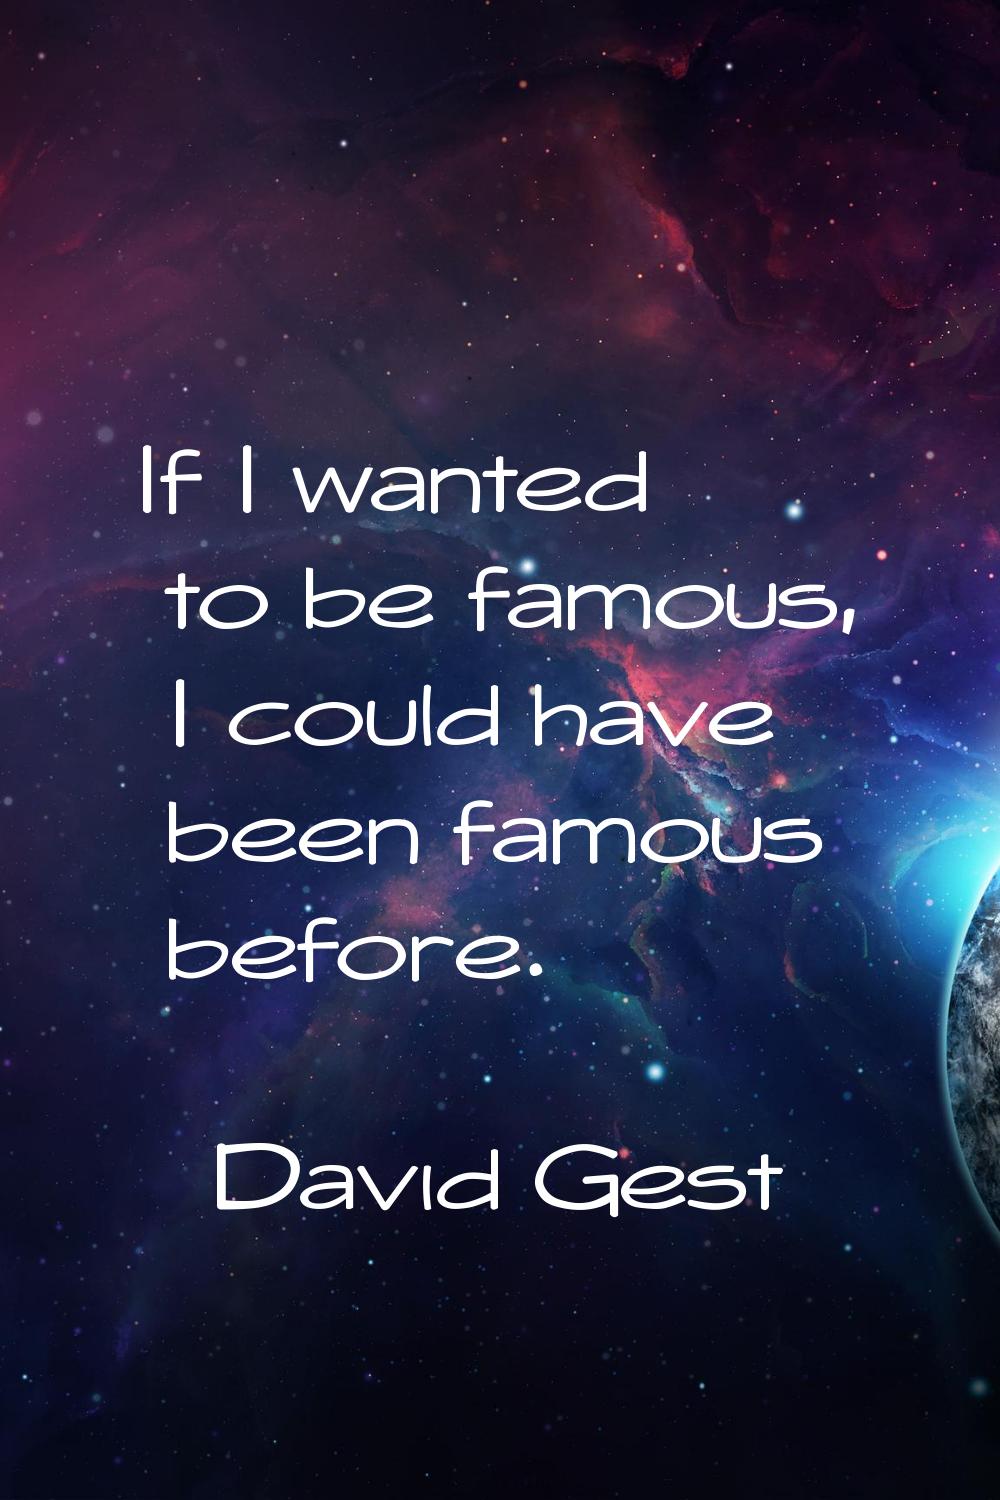 If I wanted to be famous, I could have been famous before.